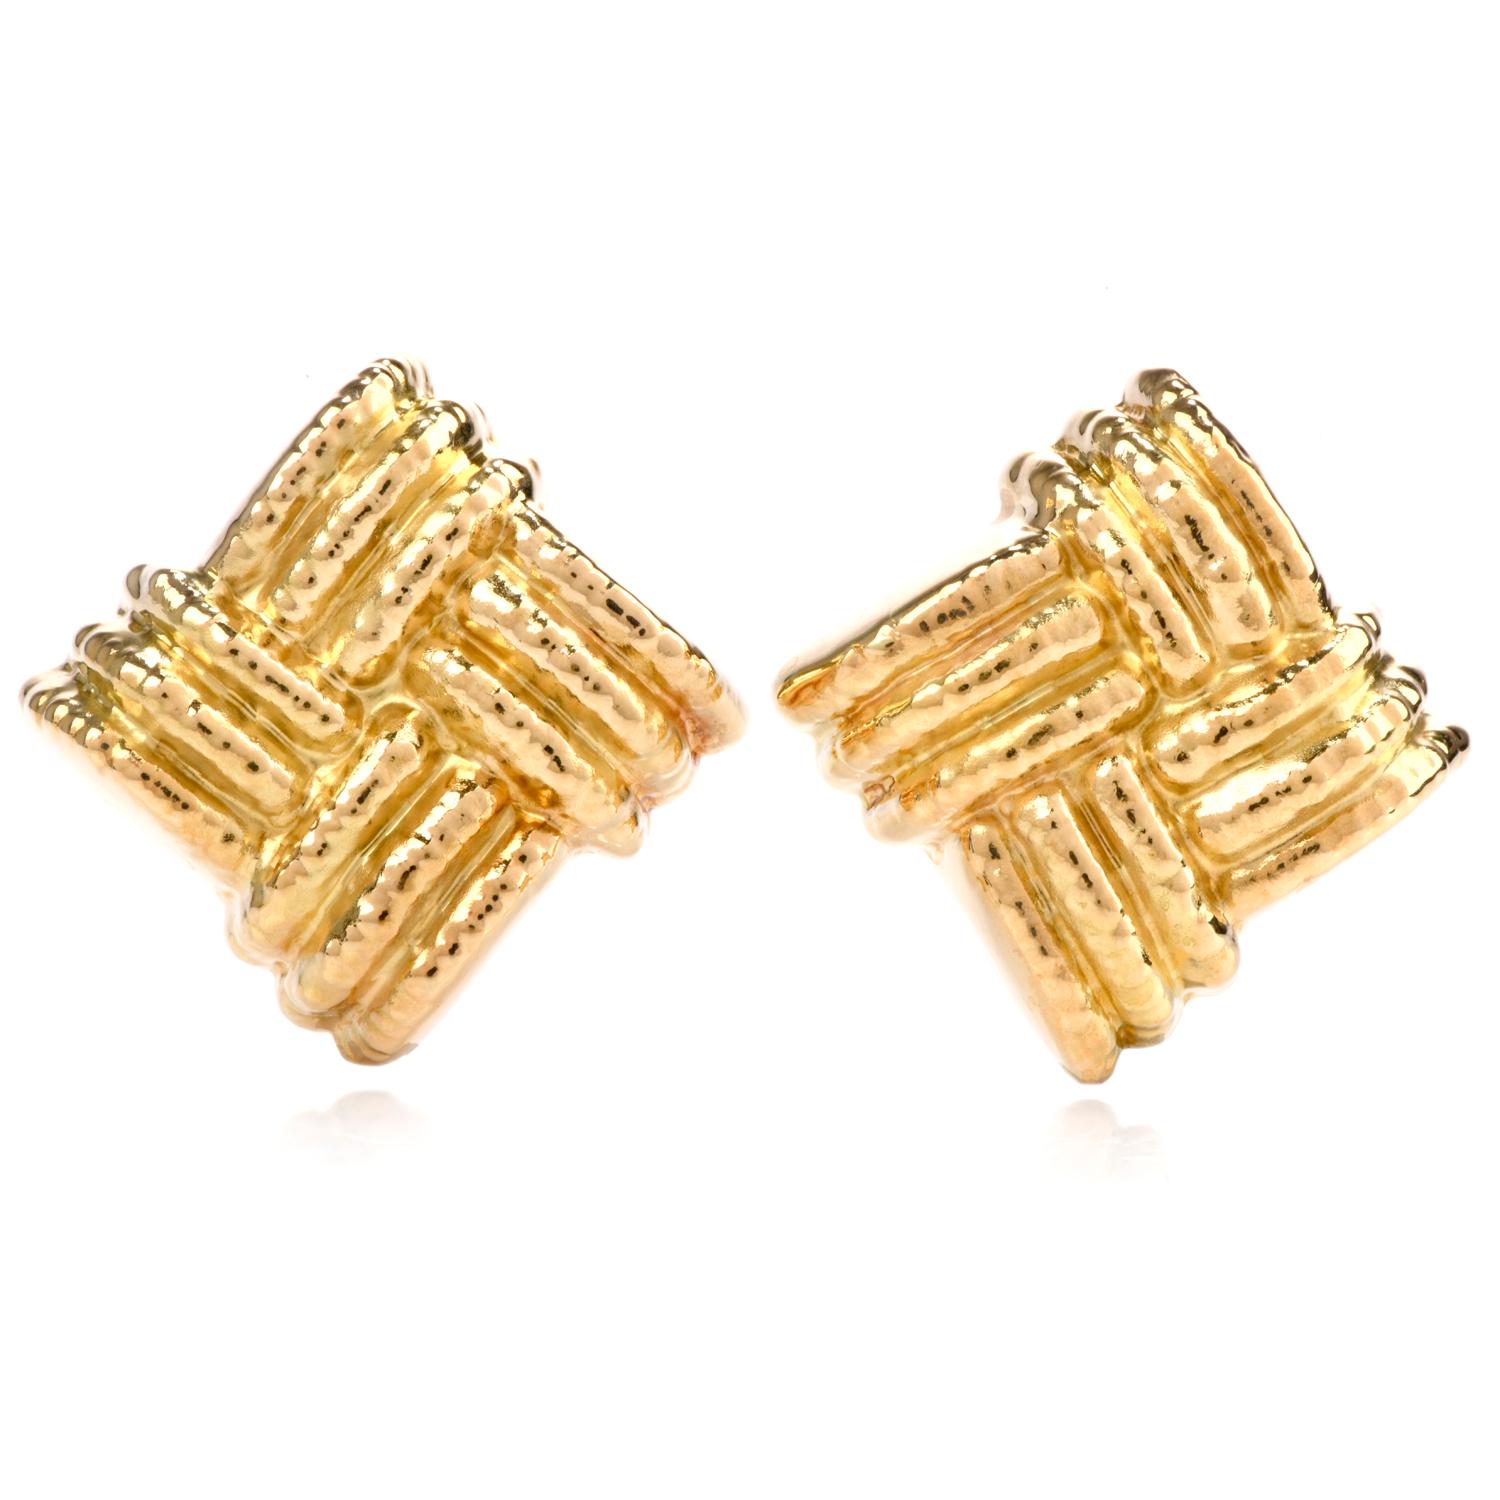 These large Nuovi Gioielli earrings were inspired in a 

criss cross motif and crafted in 18K gold.

Applied hammered texture is present throughout these chic Squre earrings.

Secure with post and clip backs.

Stamped Italy.

Hallmarked and purity